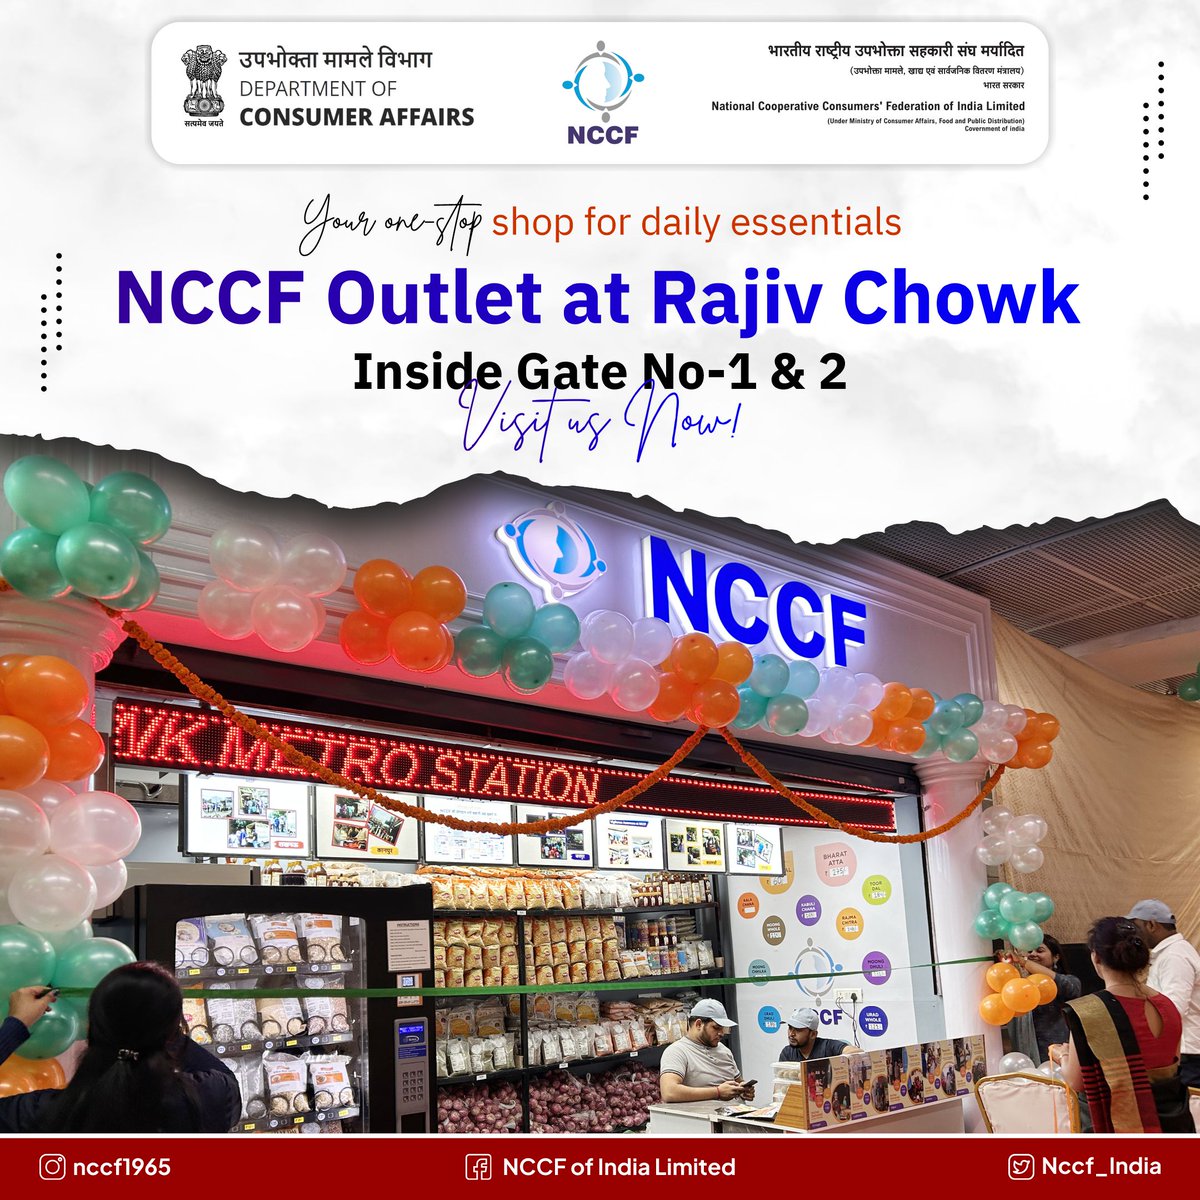 Your daily essentials are just a metro ride away! 

Visit the NCCF Outlet at Rajiv Chowk Metro Station, Inside Gate No-1 & 2. 🚇

#RajivChowk #MetroStation #BharatBrand #BharatAtta #BharatRice #BharatDal #ShopSmart #Outlet #nccf